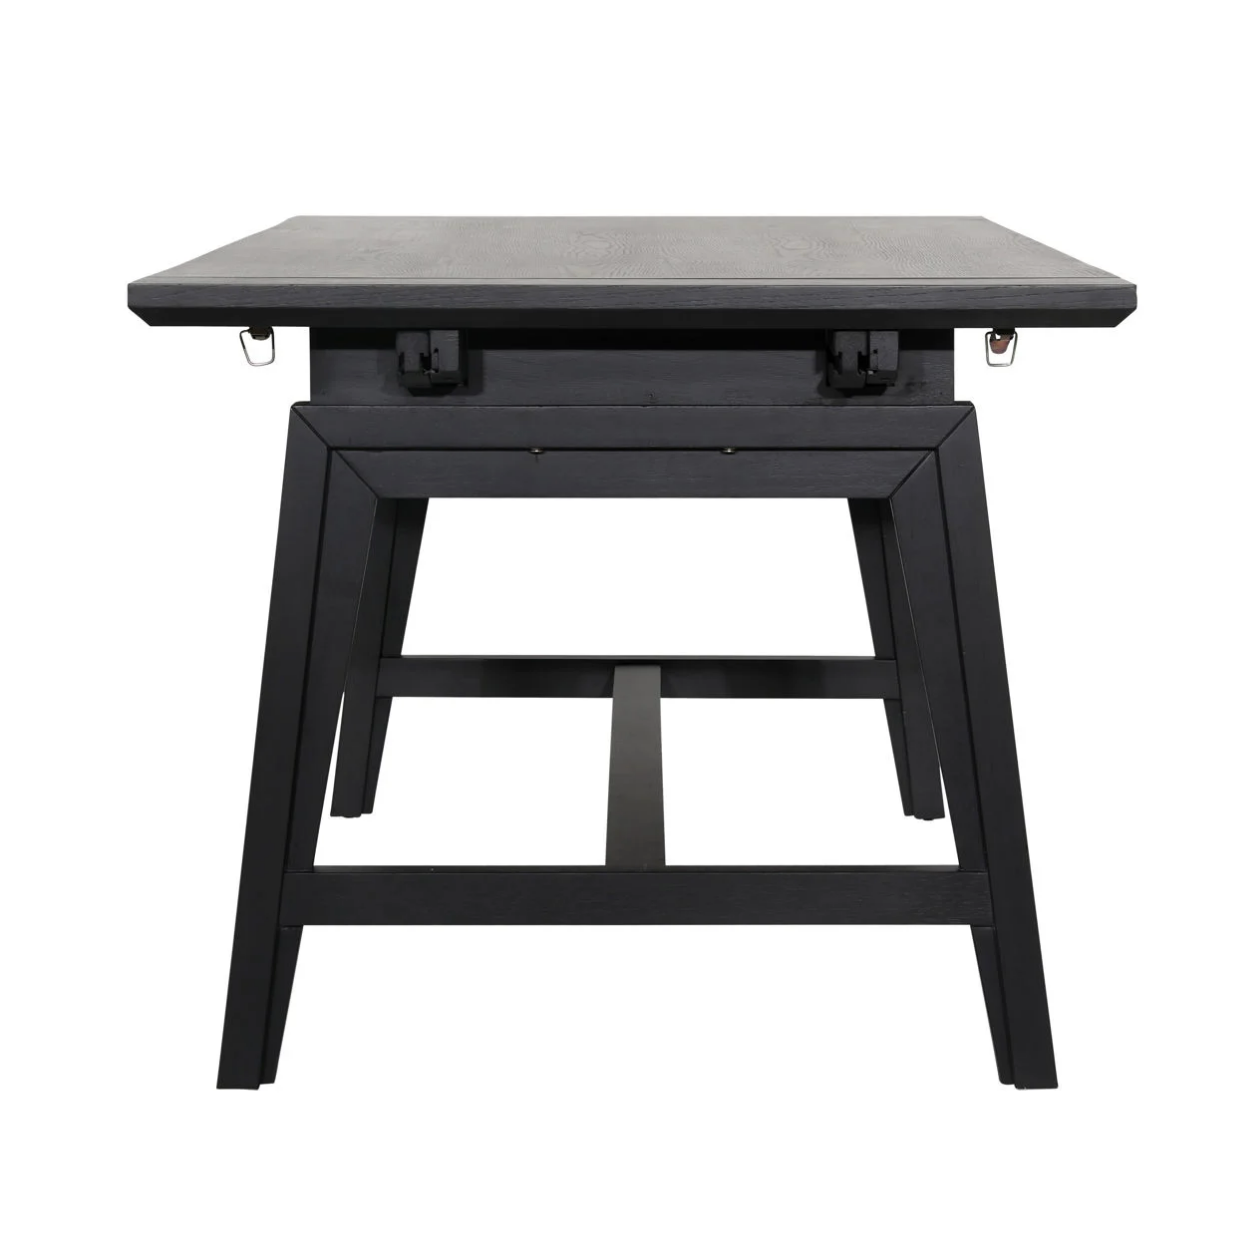 Welters Extendable Dining Table*